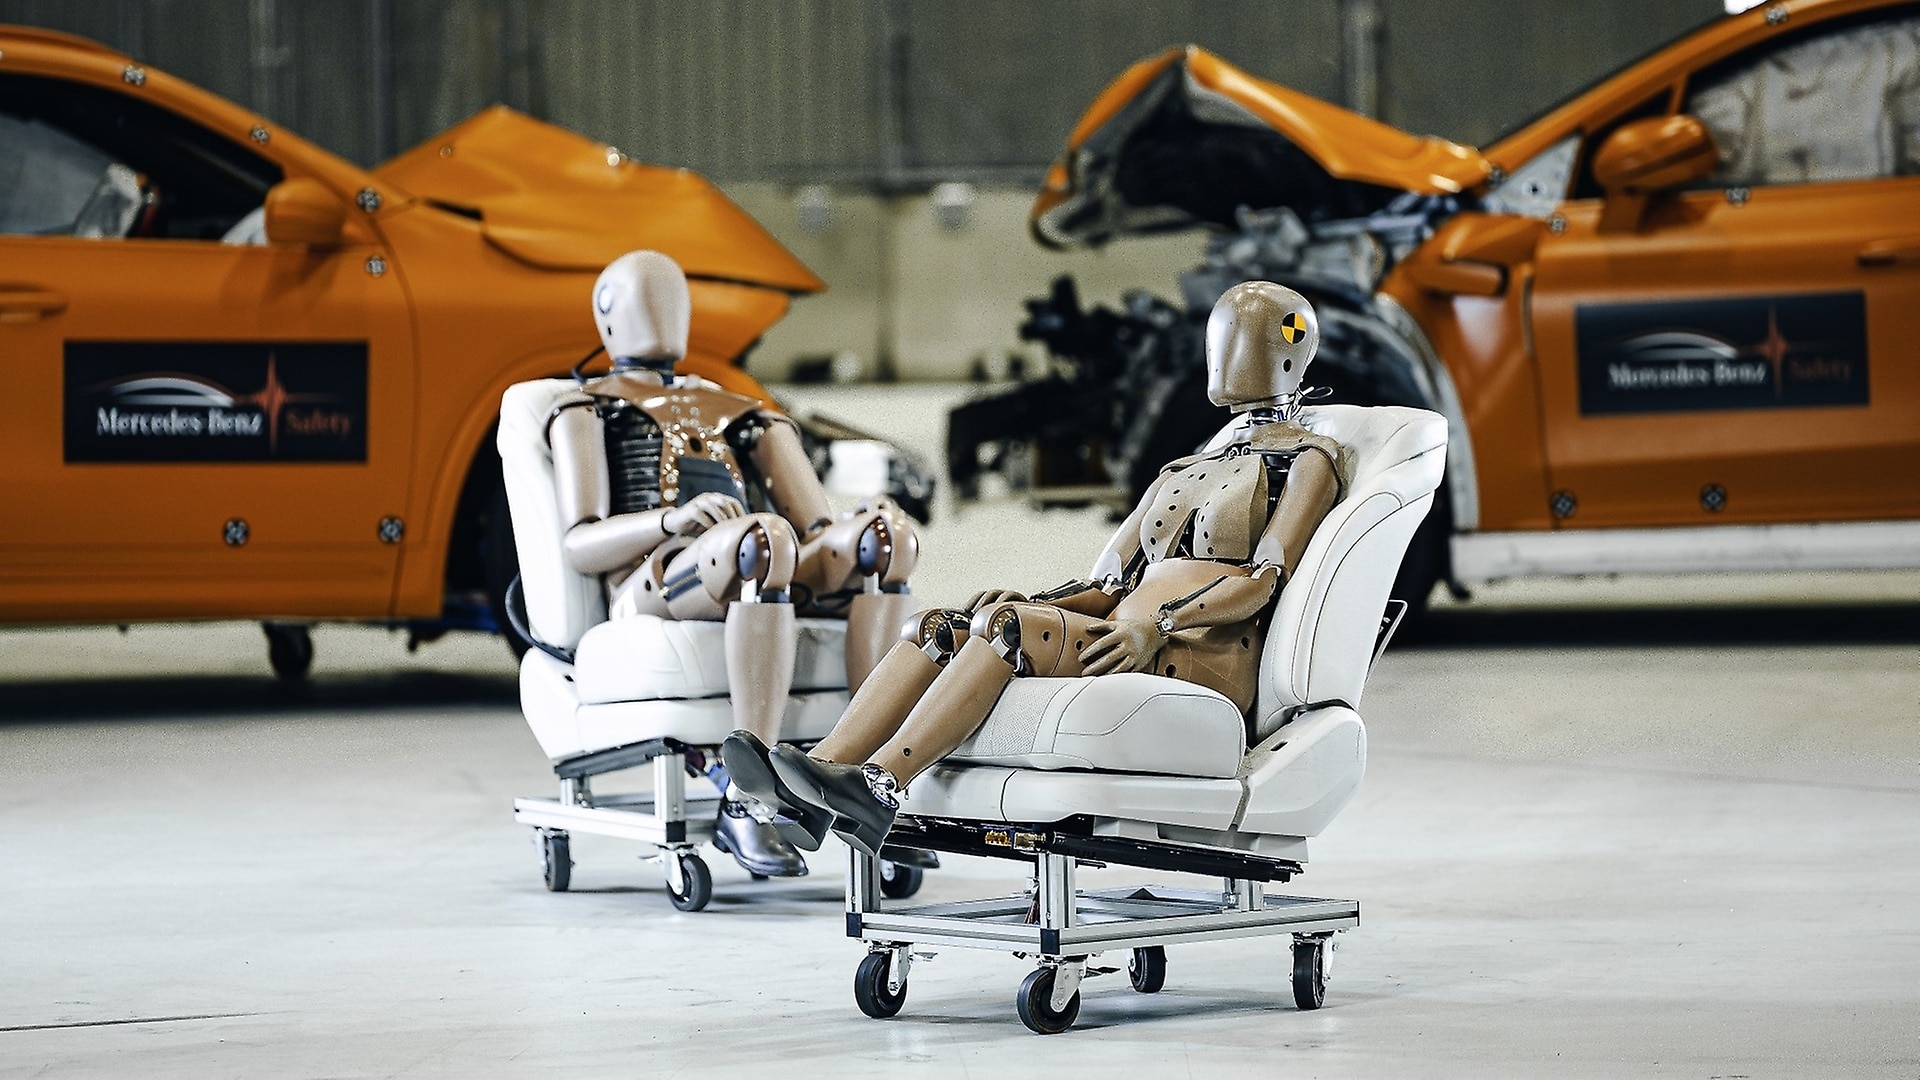 With around 150 sensors, the dummies measure the exact forces and paths that act on them during a crash test. This allows conclusions to be drawn about the probability of injury.